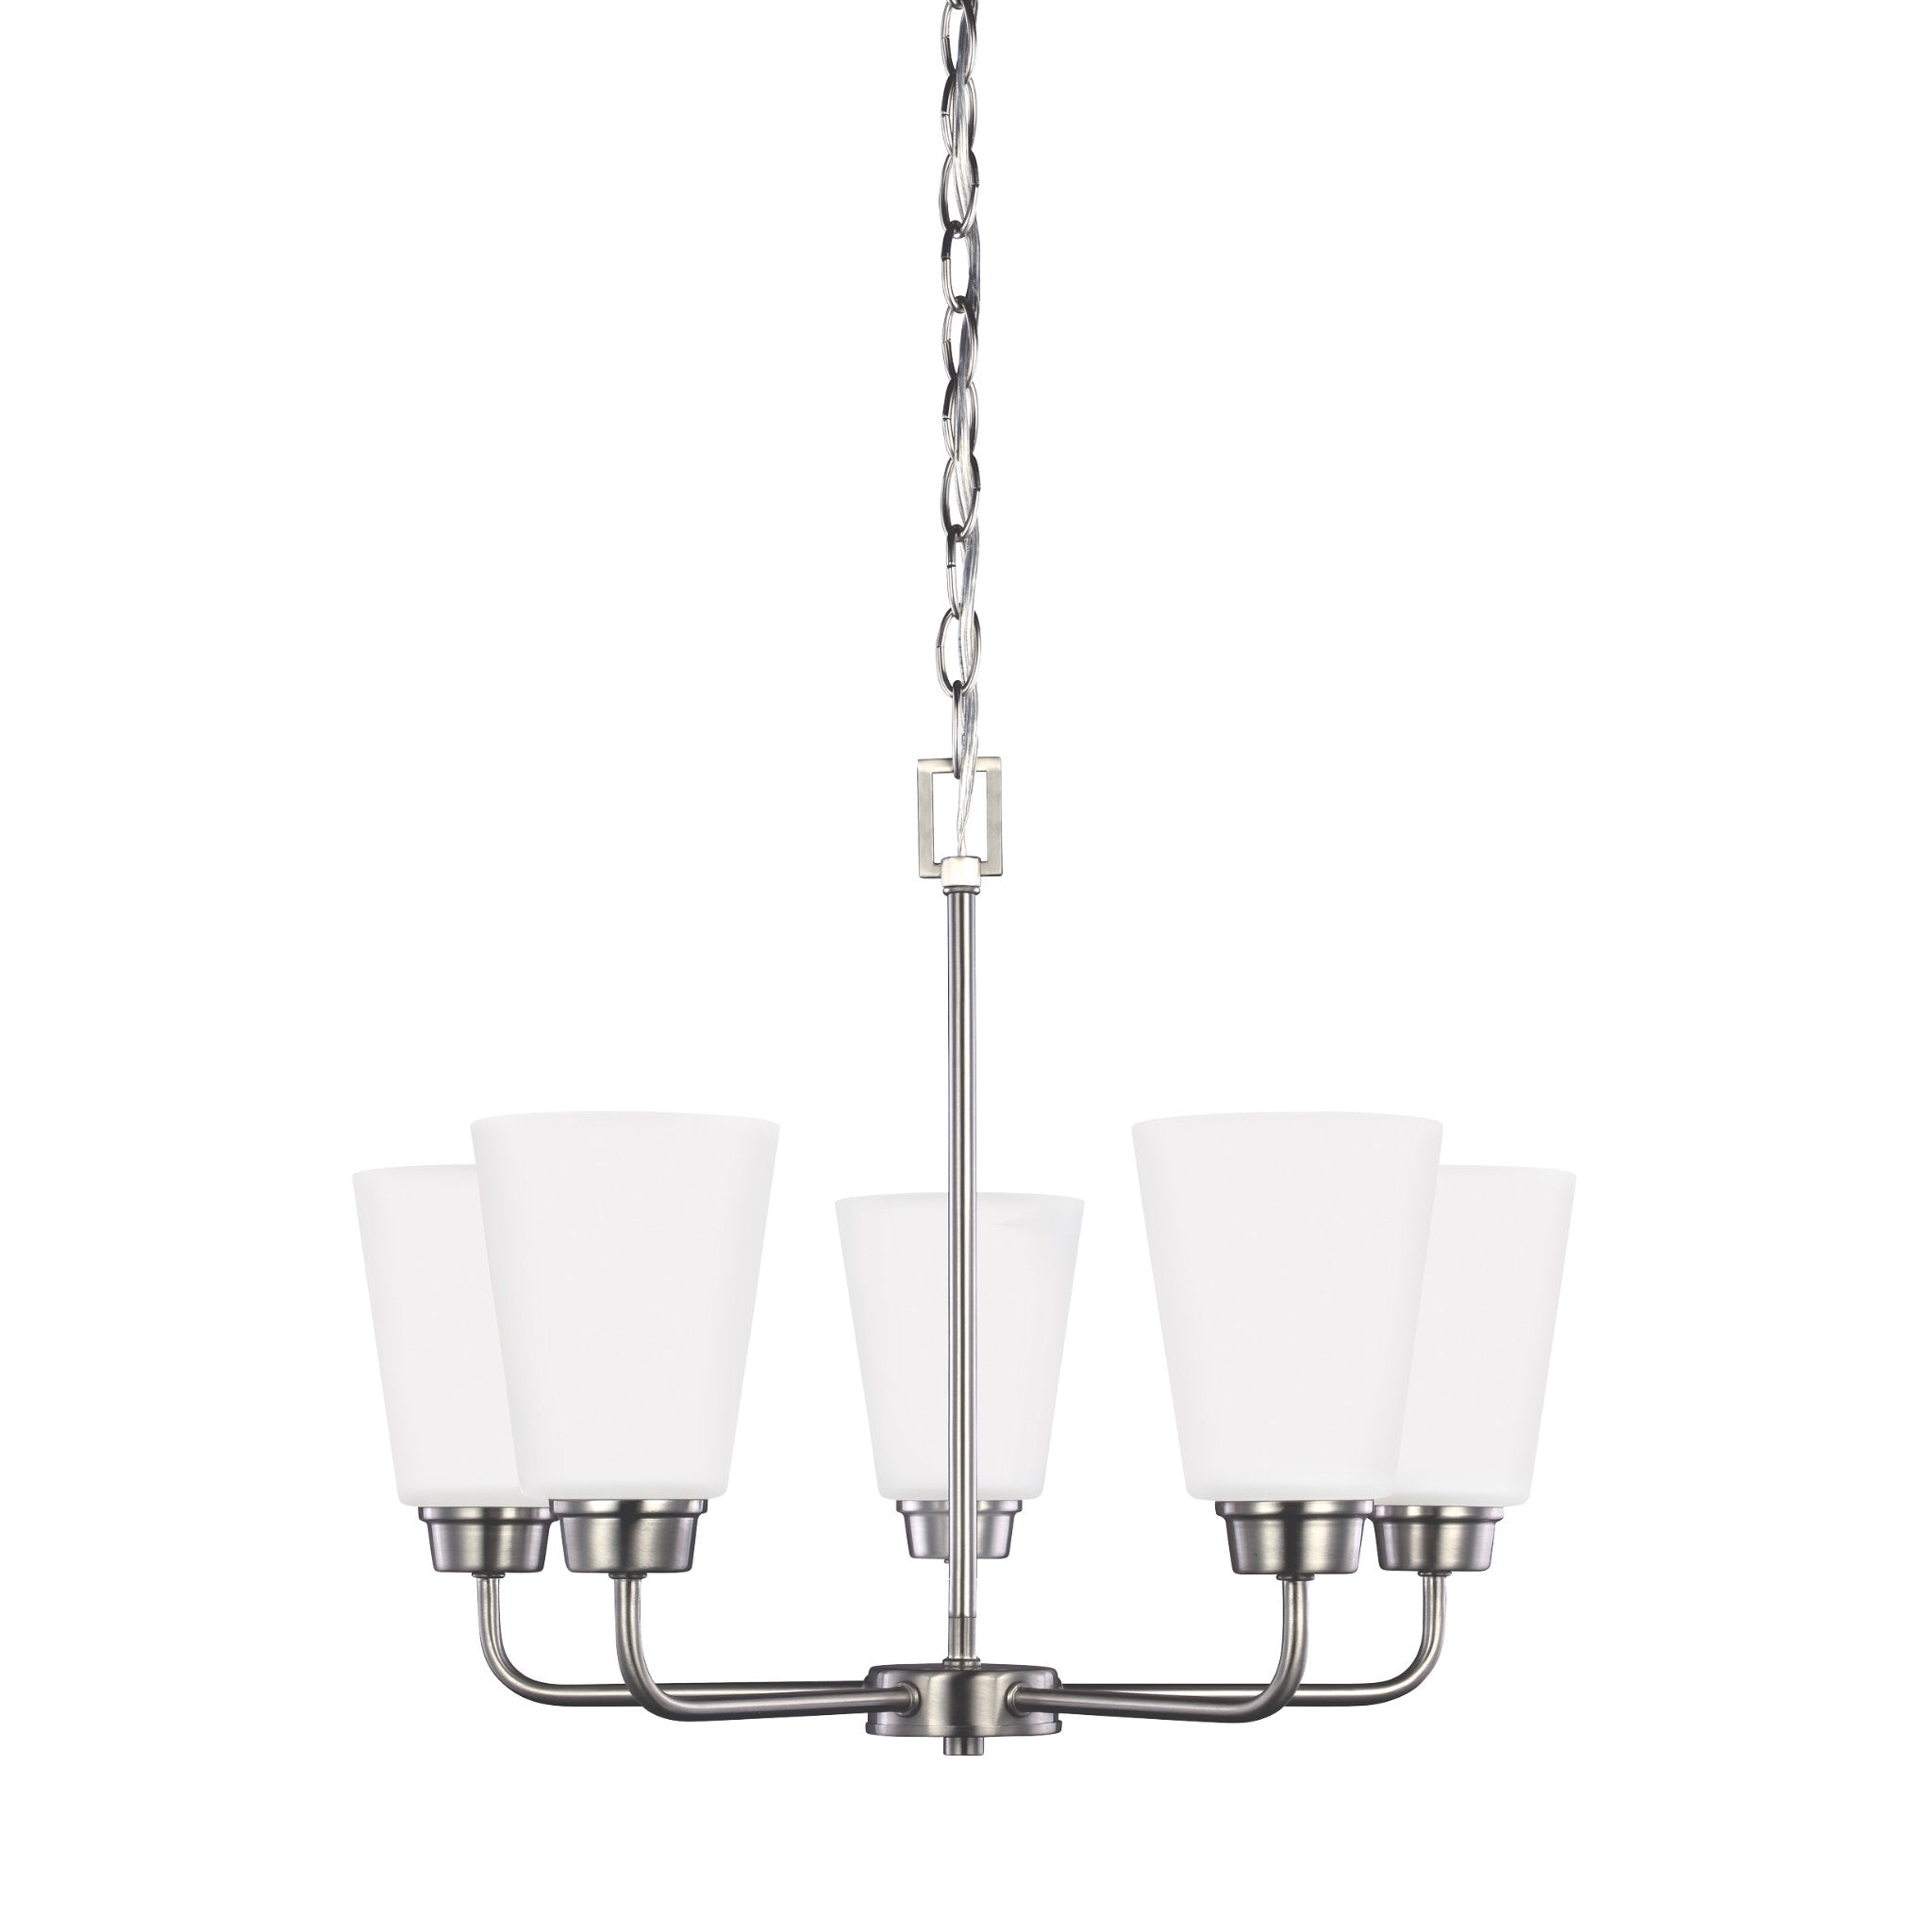 Kerrville Five Light Chandelier Transitional 17" Height Steel Round Satin Etched Shade in Brushed Nickel